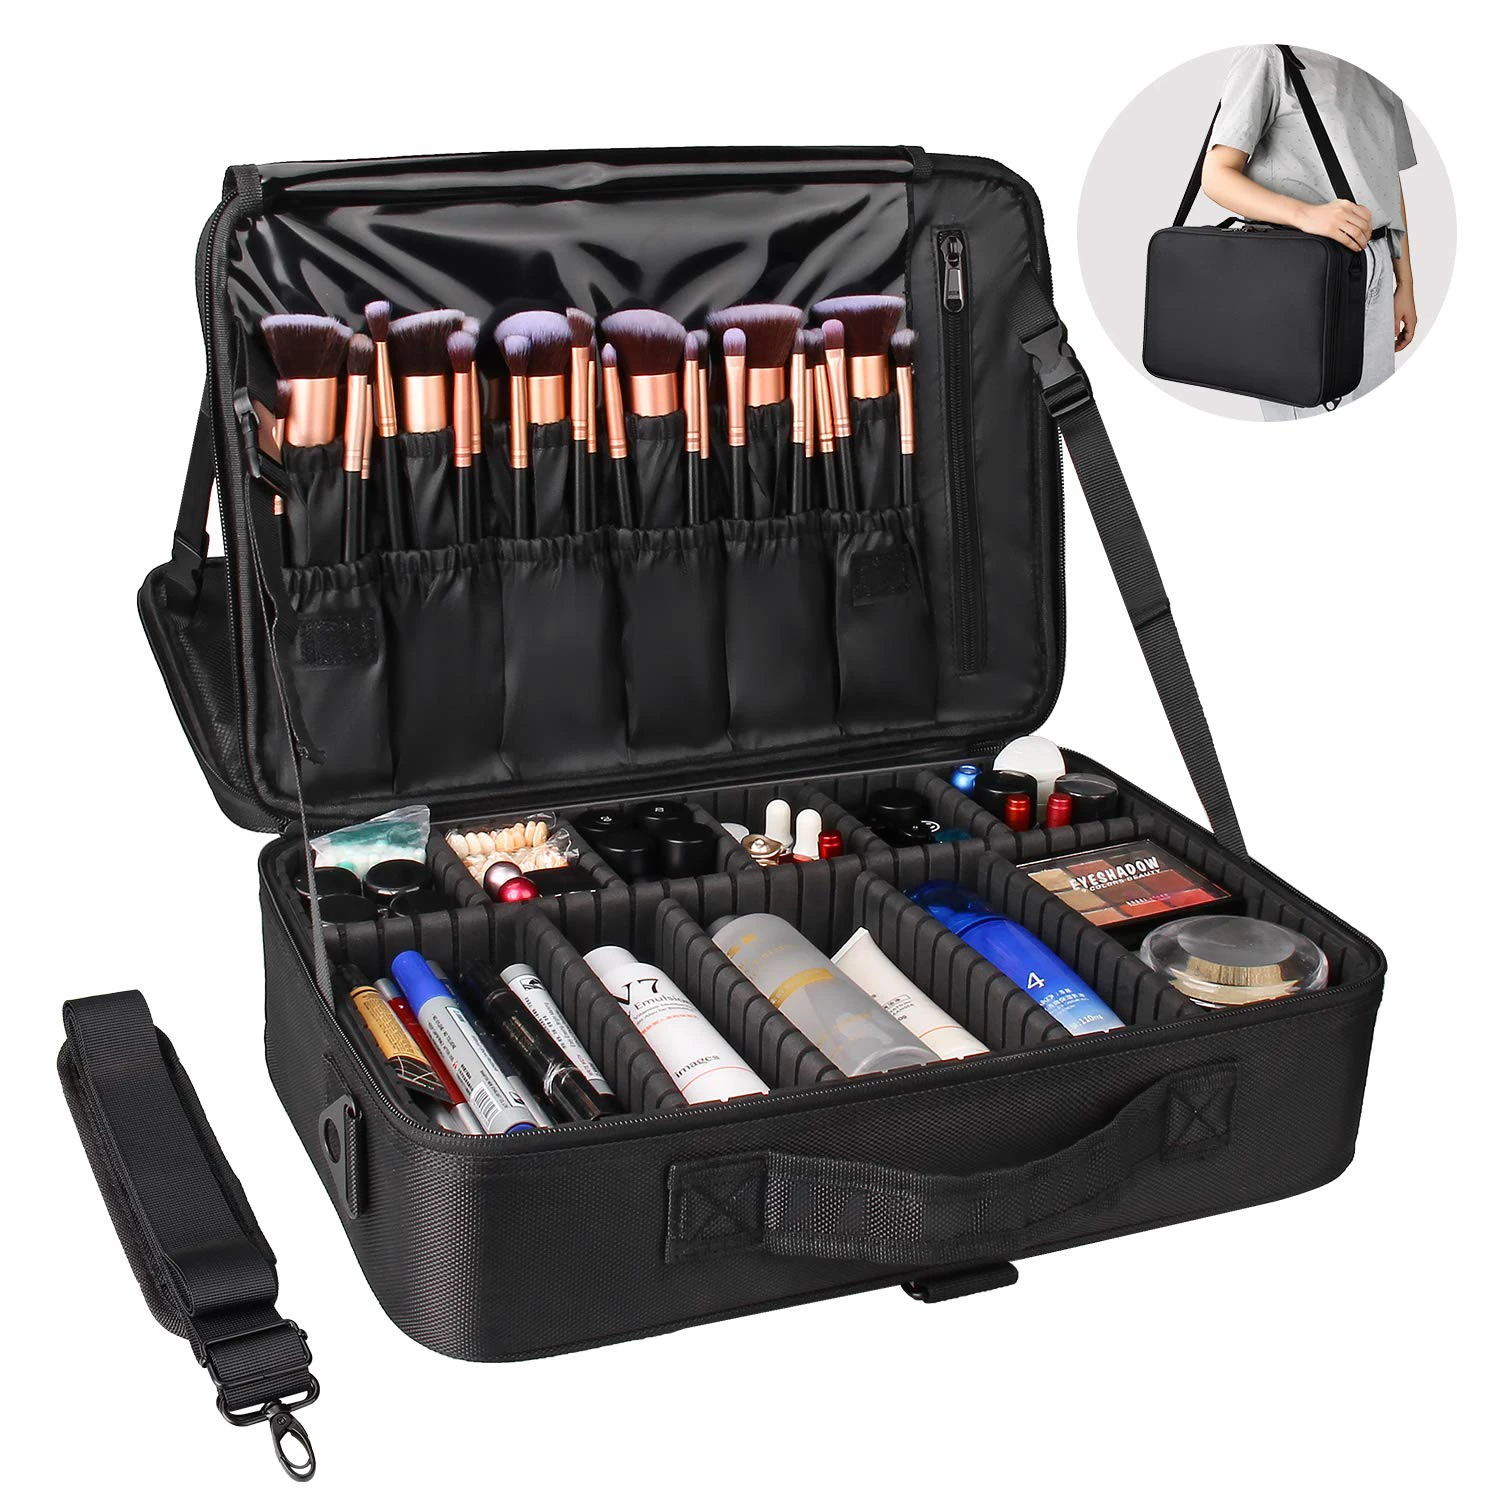 Relavel Makeup Bag Travel Makeup Train Case Large Cosmetic Case Organizer and Storage with Adjustable Dividers